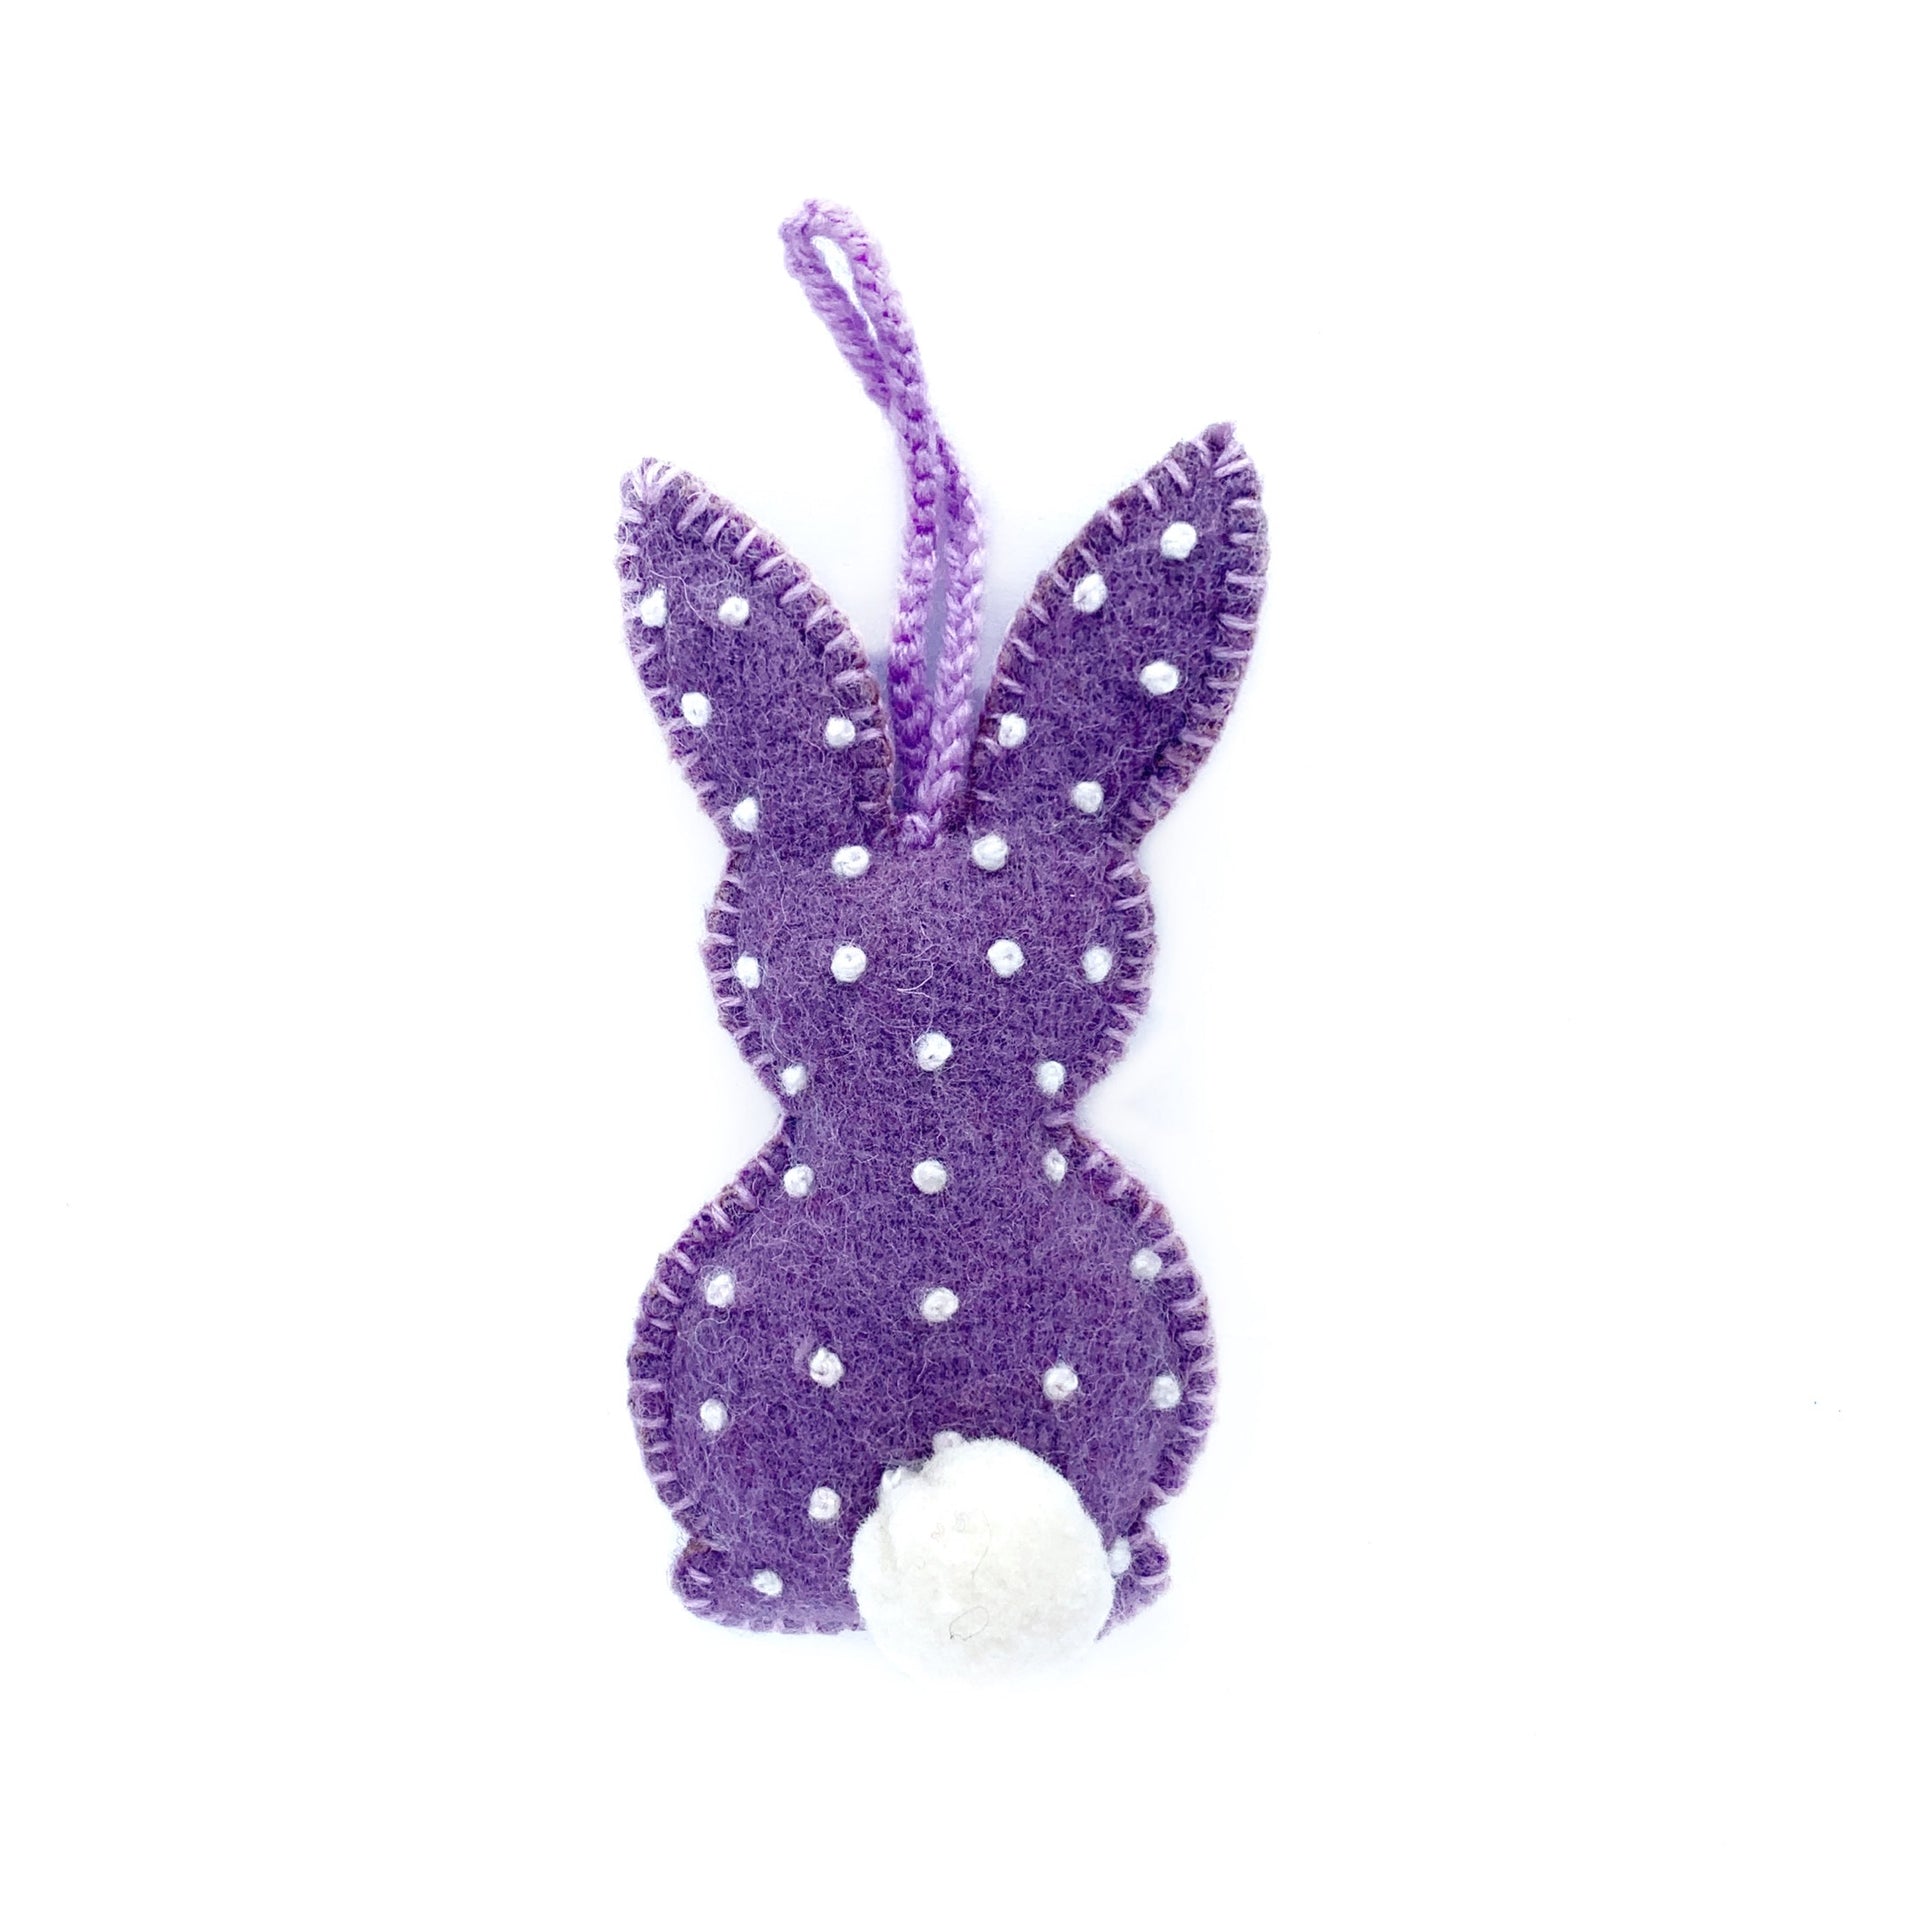 Pastel purple handmade Easter bunny ornament with embroidered white dots and pom pom tail.